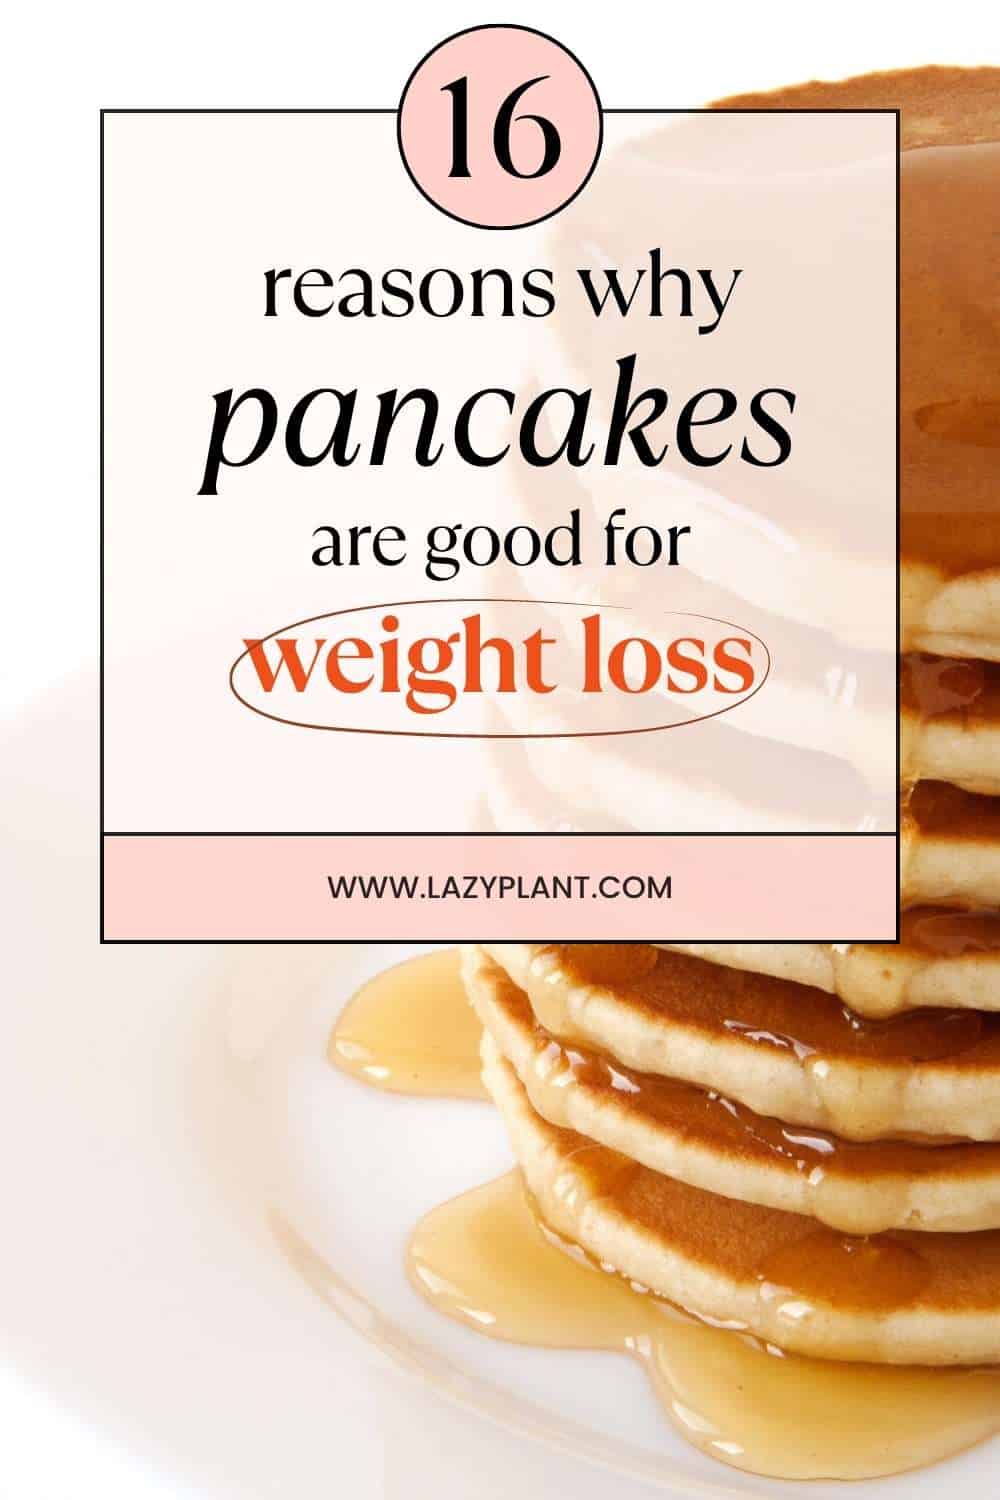 pancakes have many benefits for weight loss!